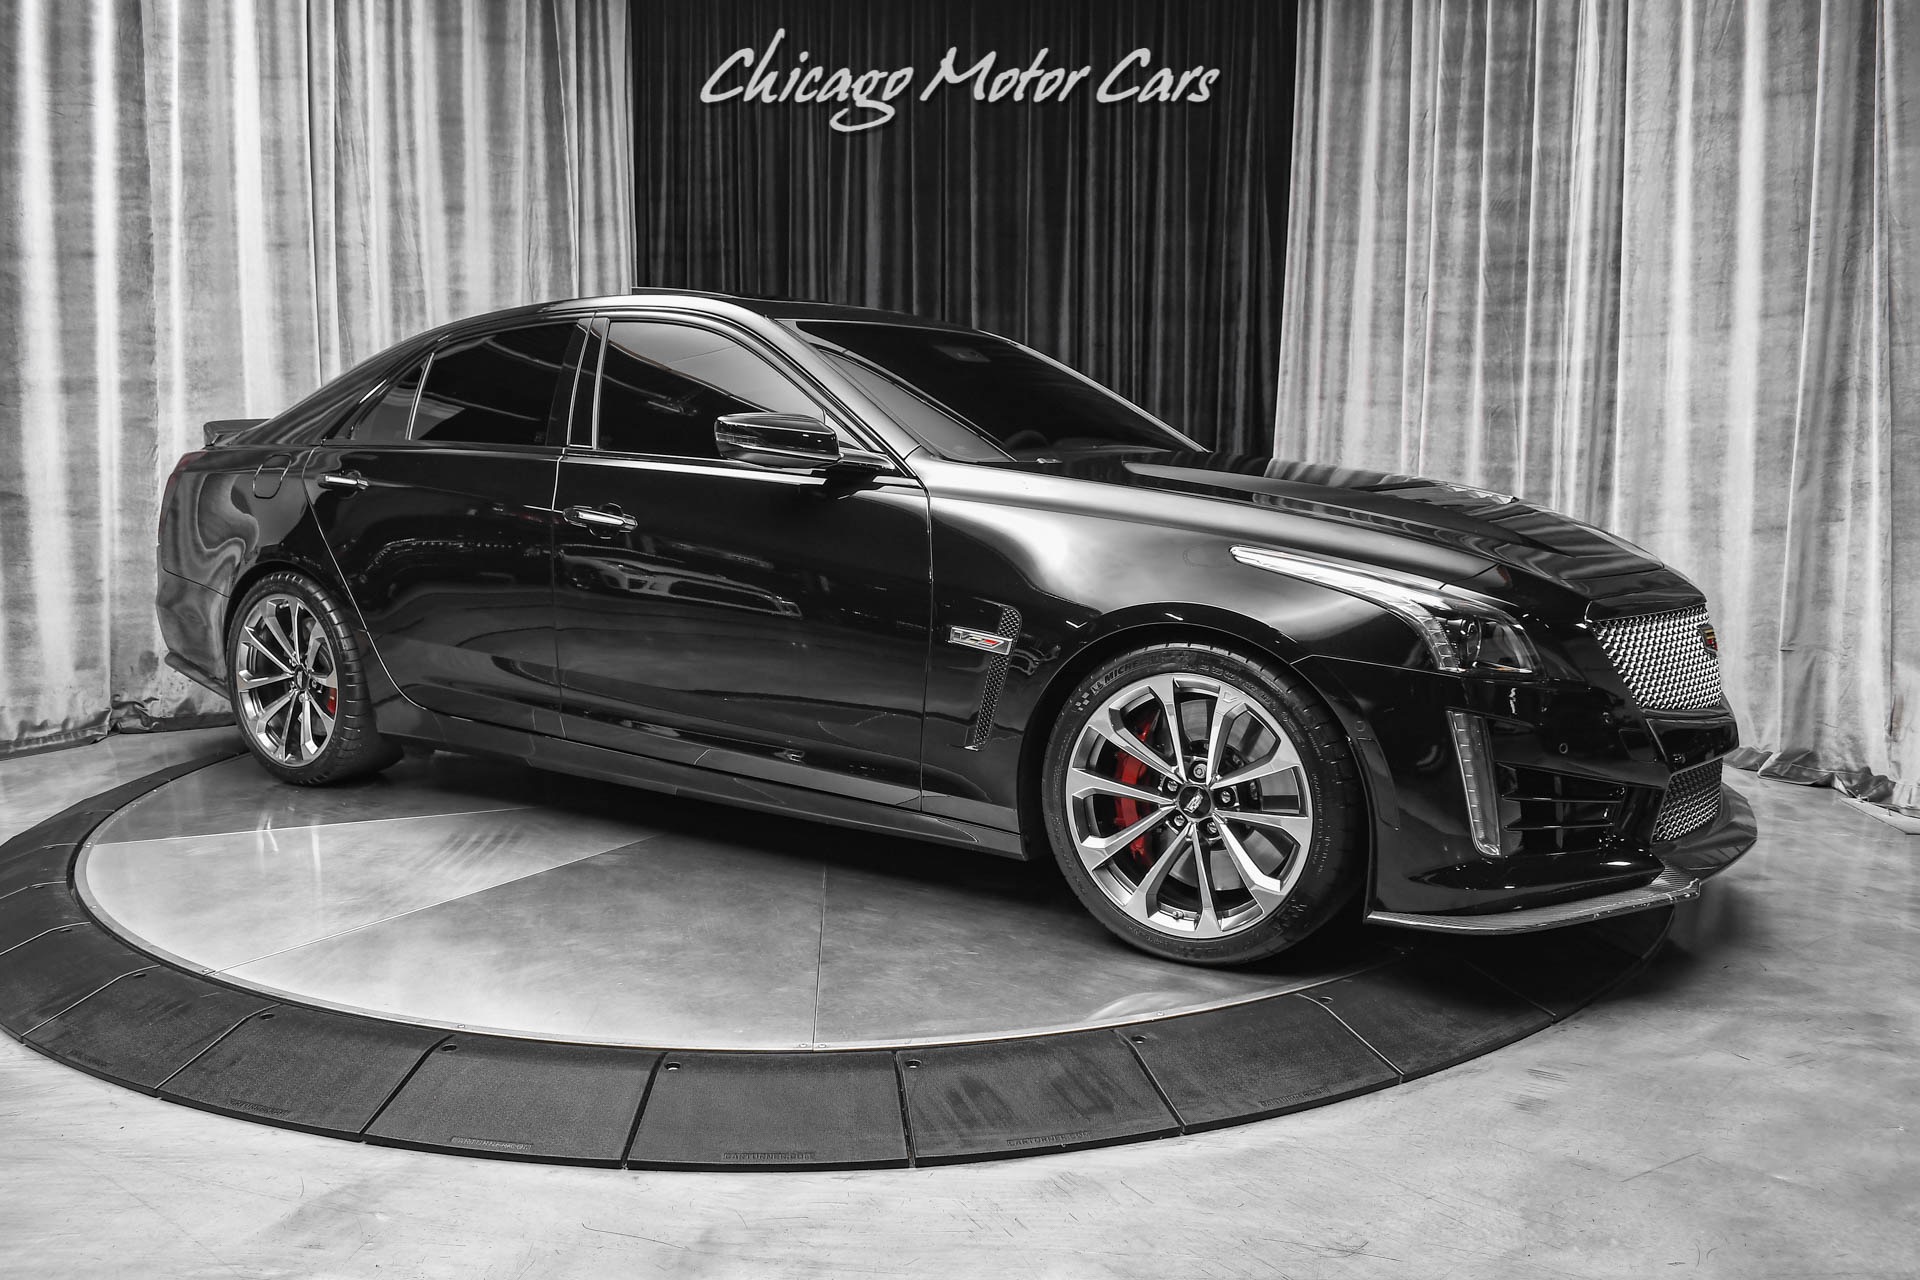 Used-2016-Cadillac-CTS-V-Sedan-Carbon-Fiber-Pack-Luxury-Pack-Upgrades-Low-Miles-LOADED